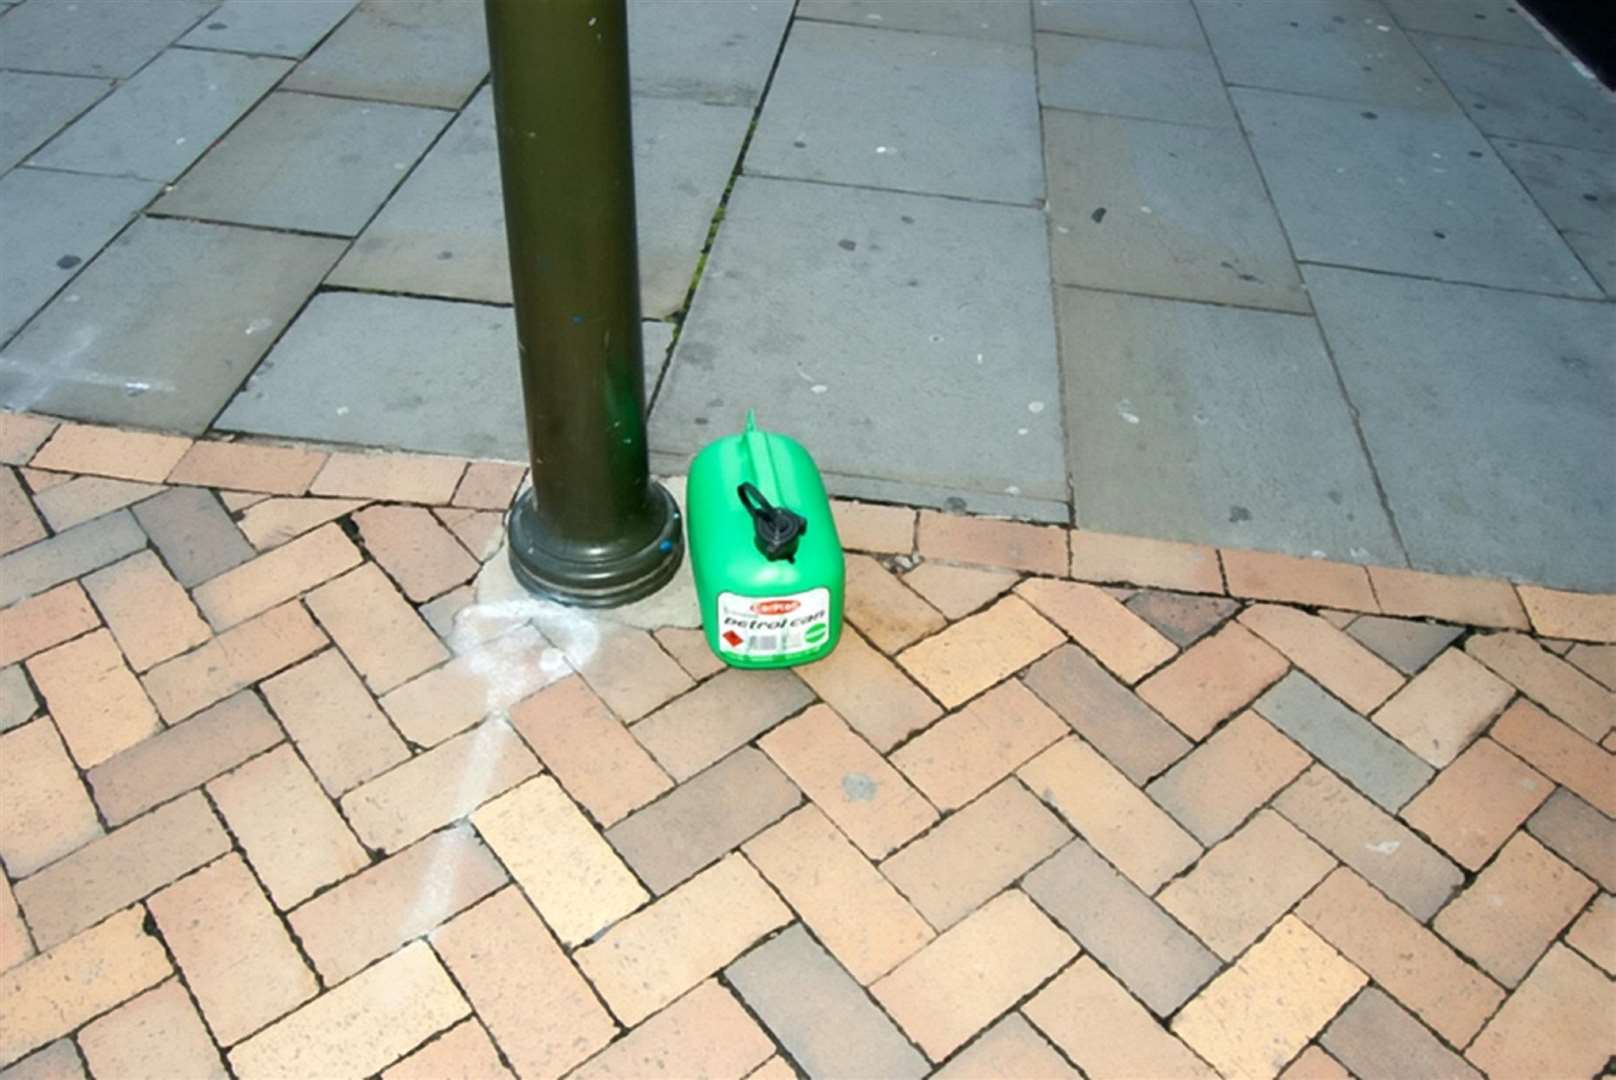 The petrol can belonging to Jason Duncan-King. Picture: SWNS